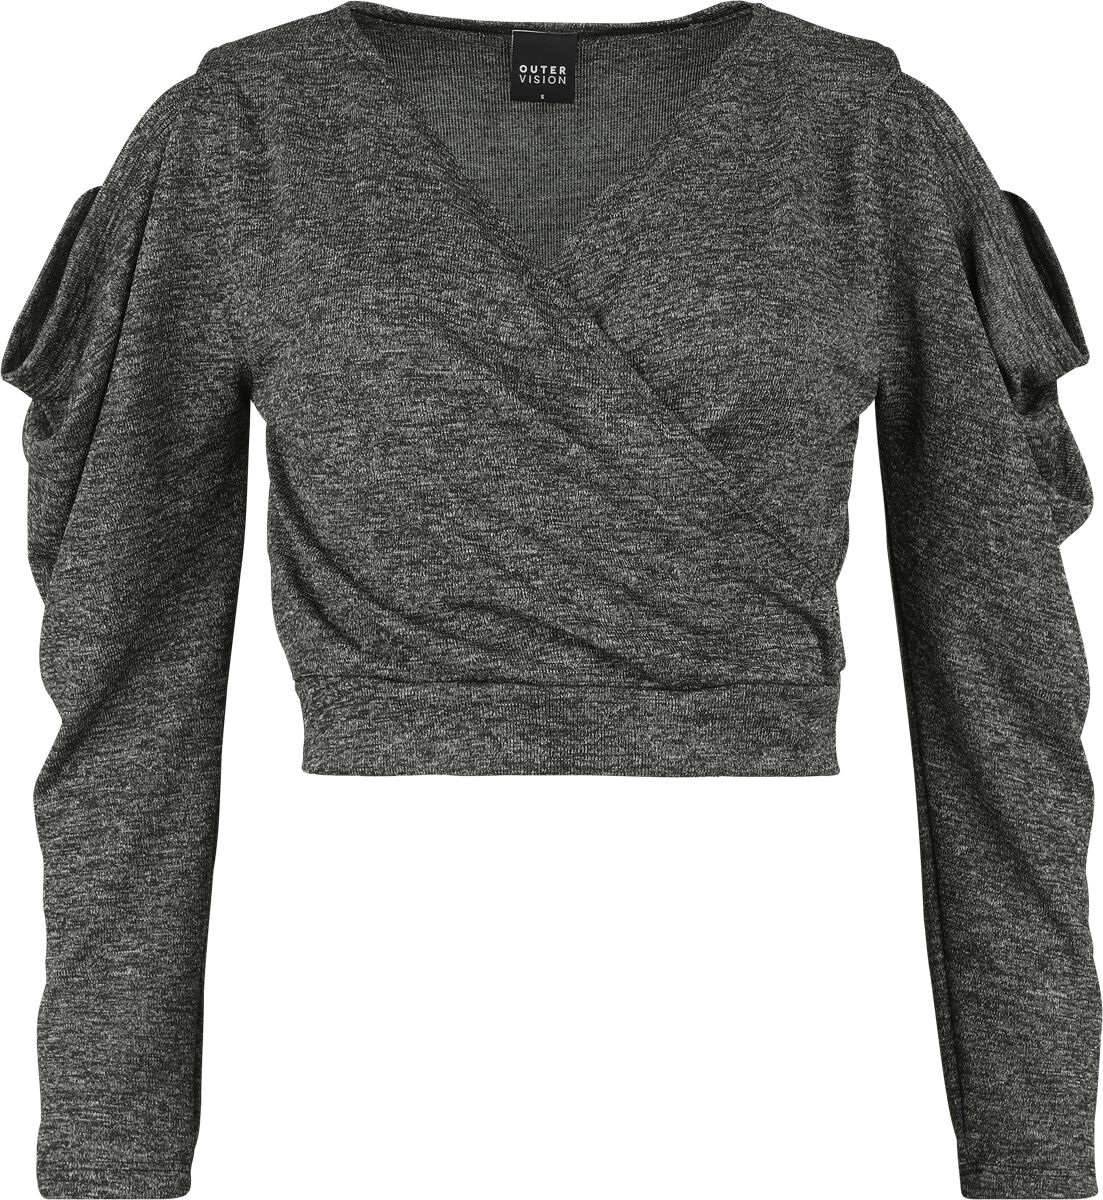 Image of Cardigan di Outer Vision - Maddie cardigan - M a XXL - Donna - grigio sport